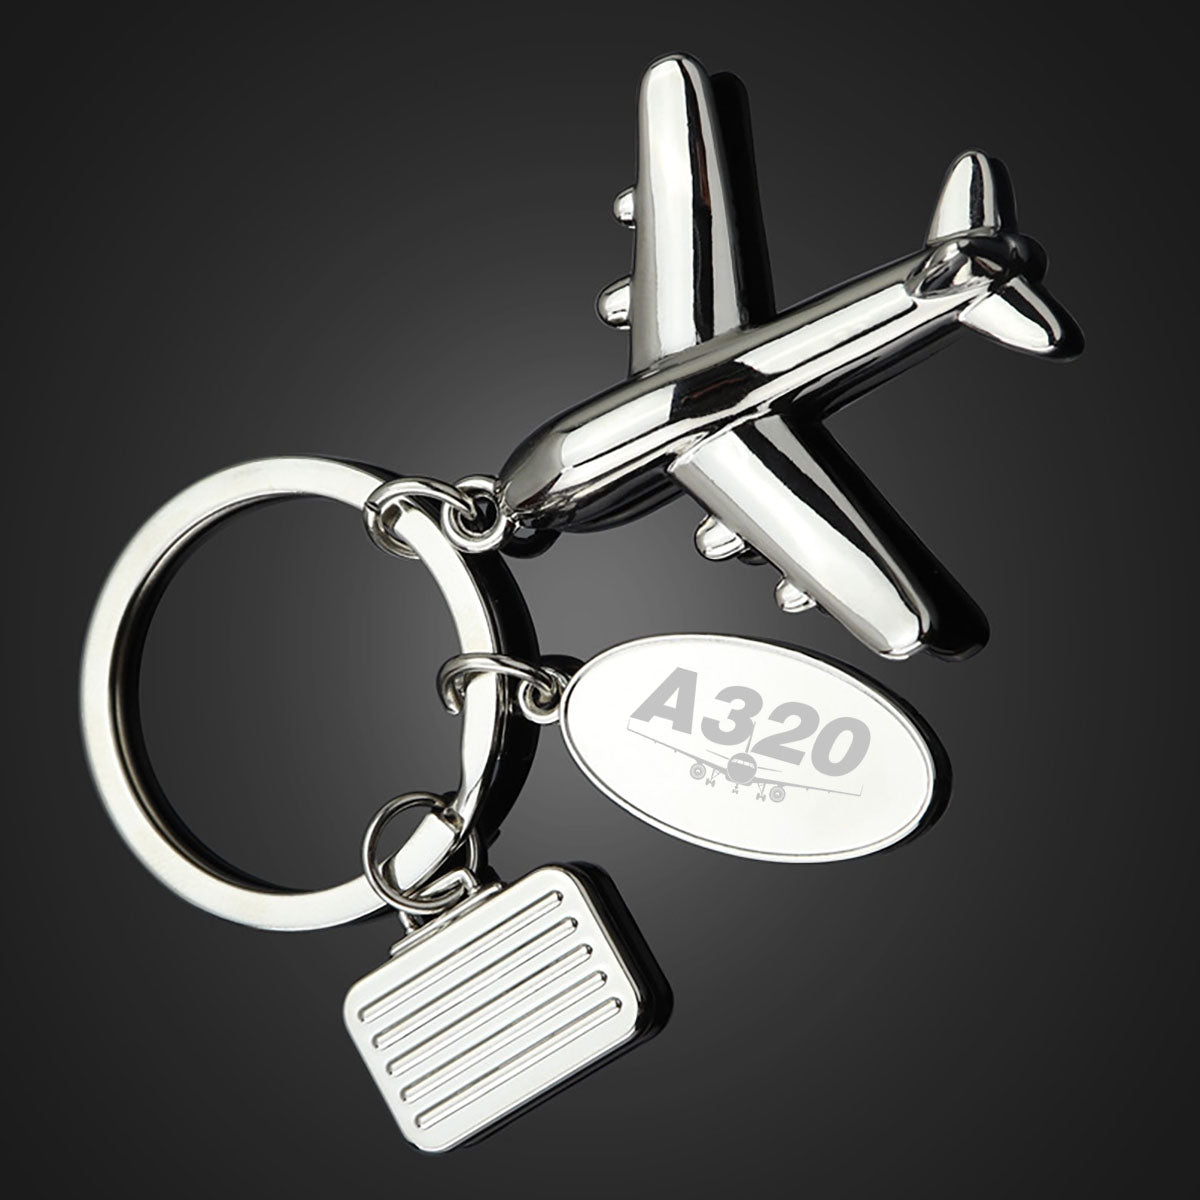 Super Airbus A320 Designed Suitcase Airplane Key Chains